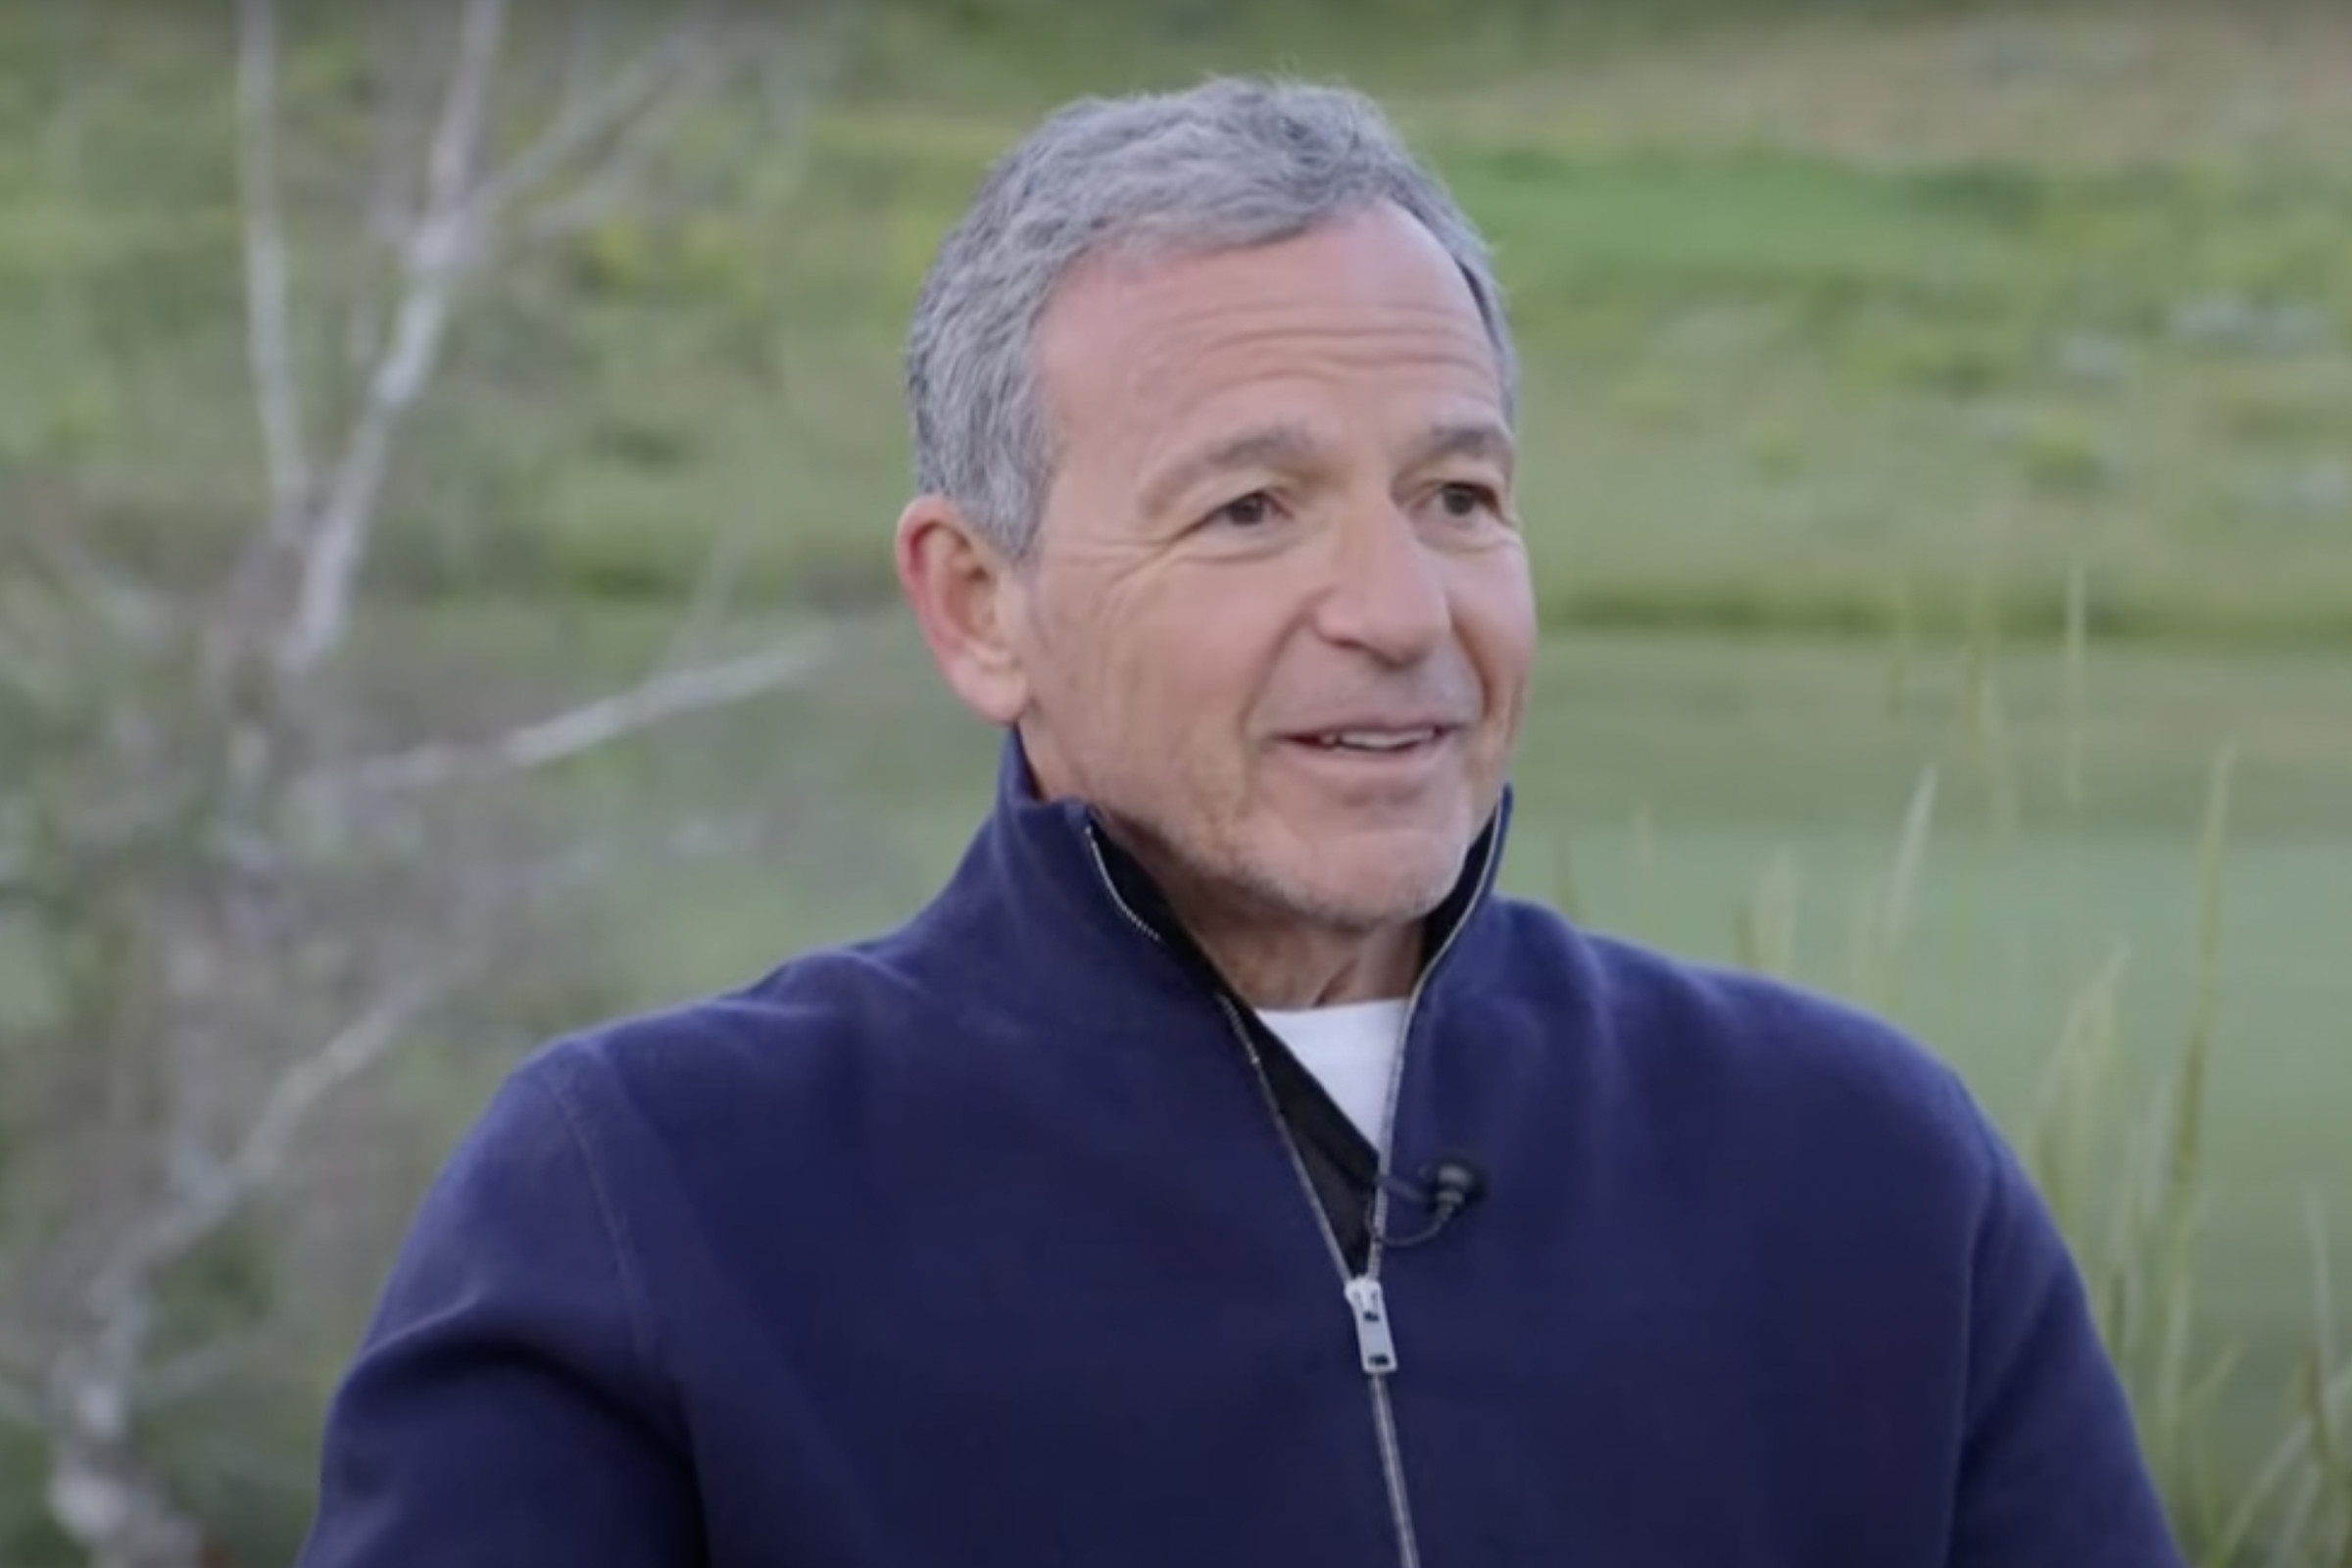 An image showing Bob Iger